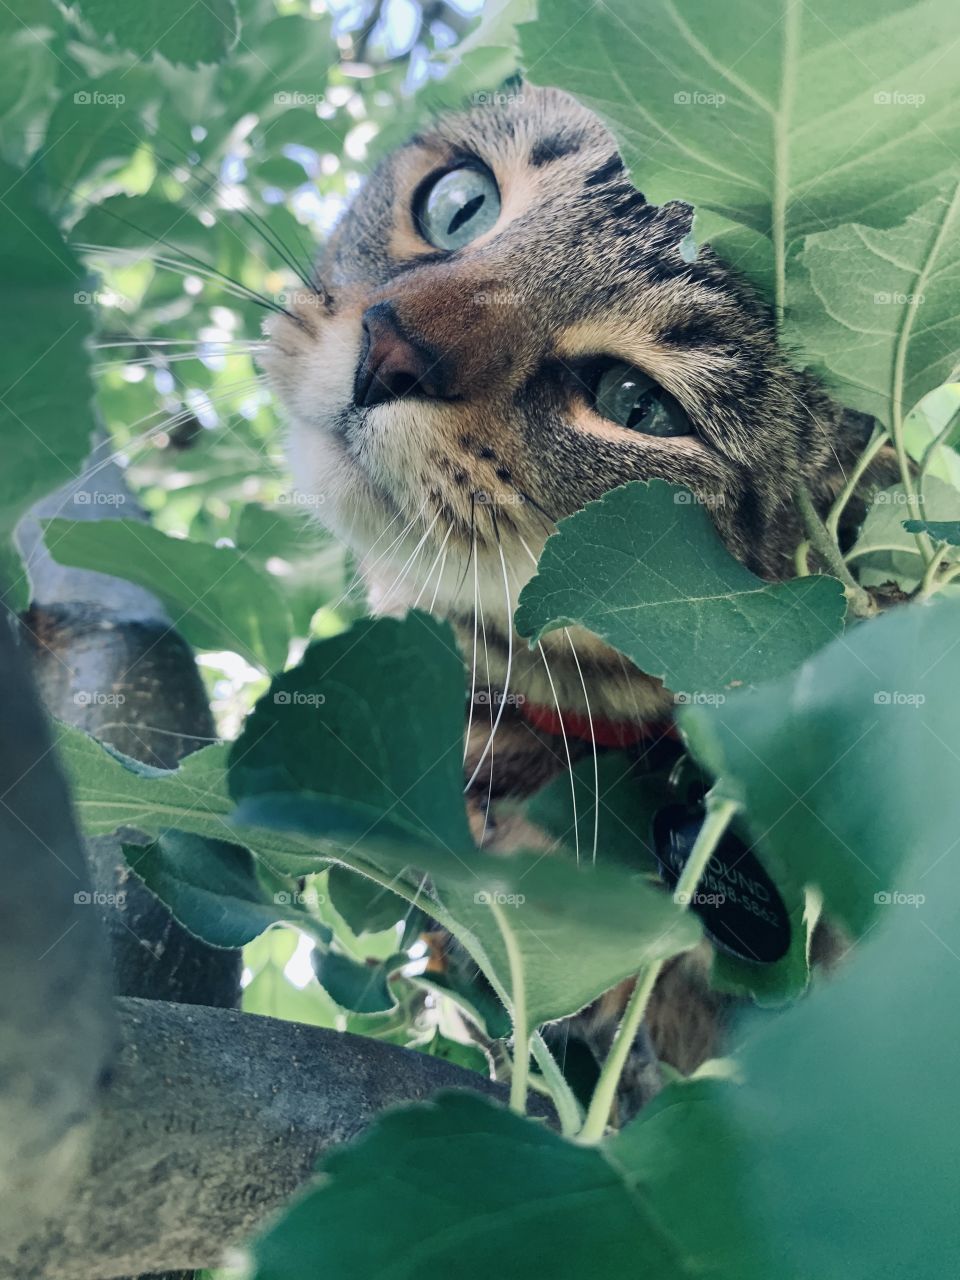 Cat photography in ny backyard taken with an iphone xr. My cat is very photogenic and loves to be the center of attention. 